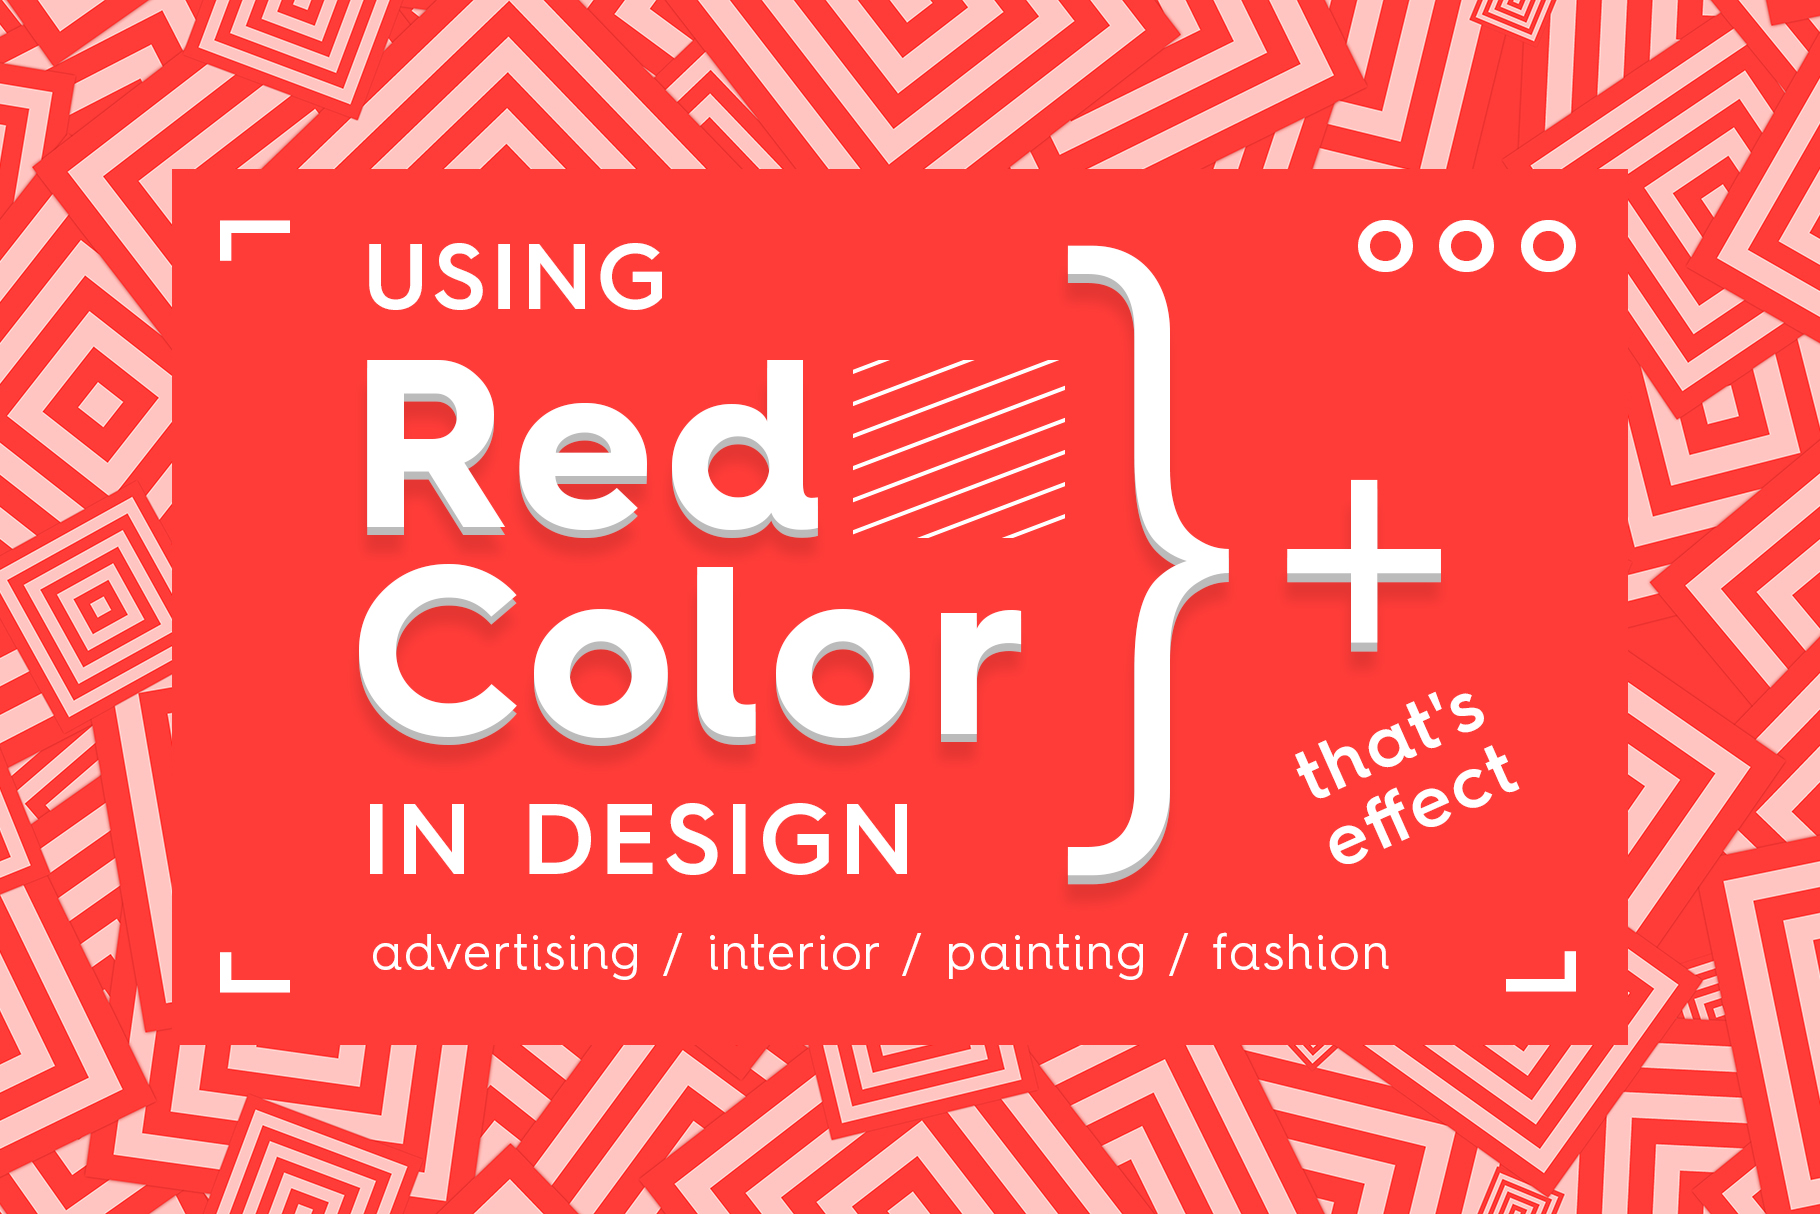 Using red color in design